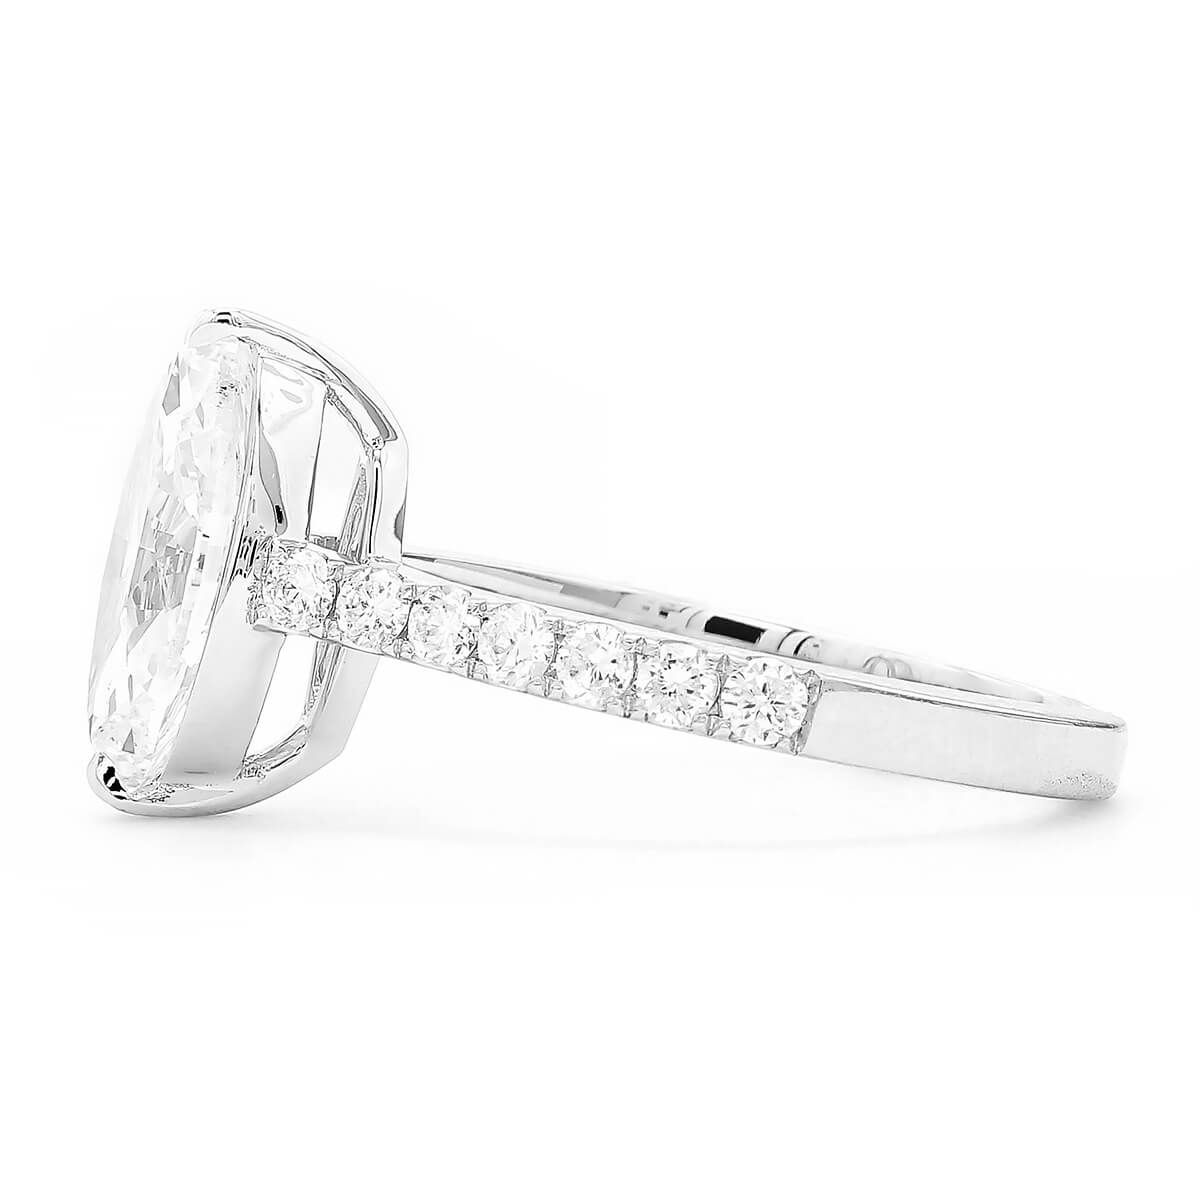  White Diamond Ring, 2.01 Ct. (2.51 Ct. TW), Marquise shape, GIA Certified, 2191512597